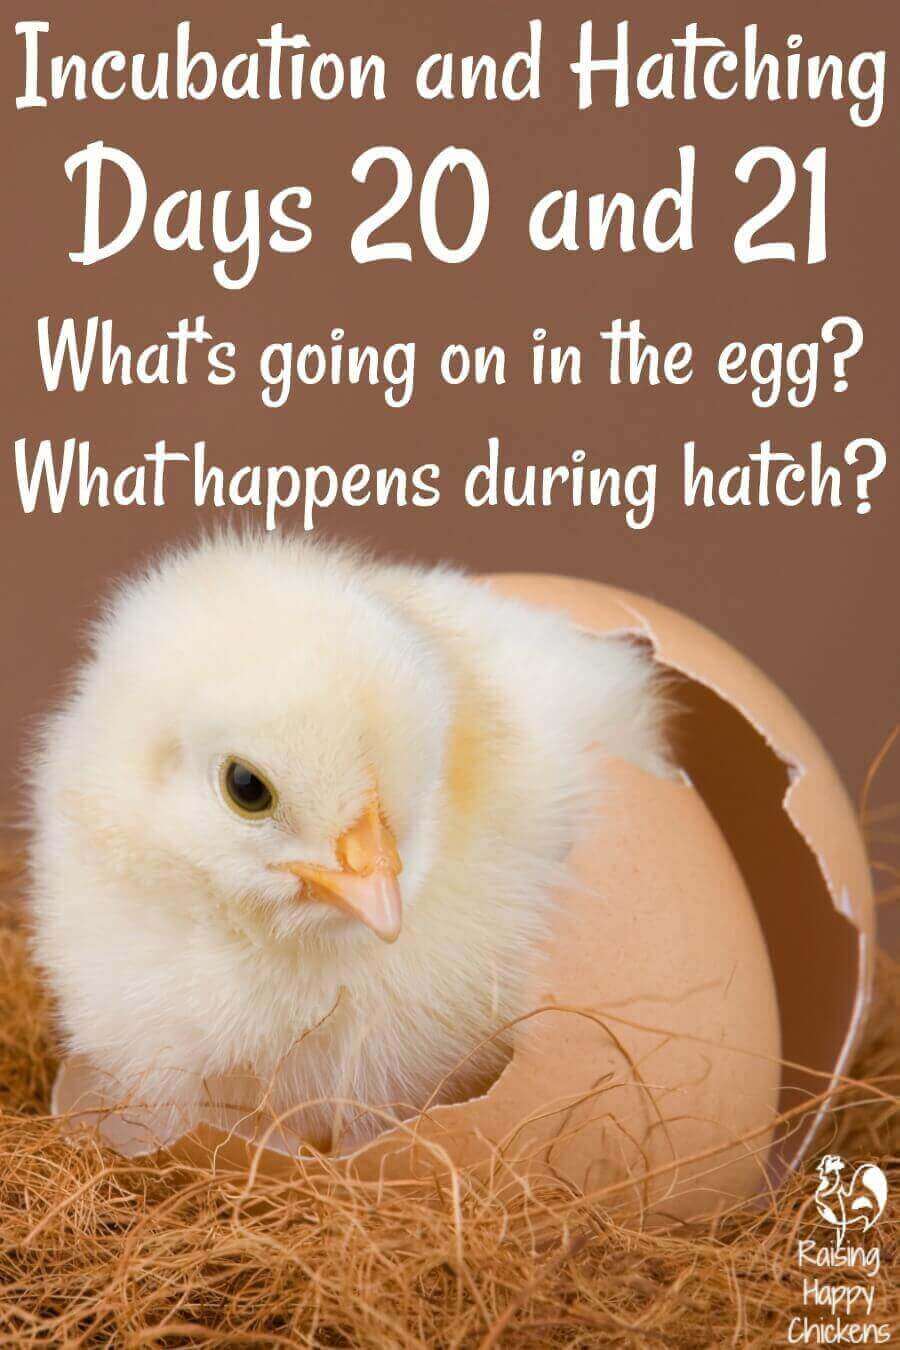 What Is The Process Of Chicks Hatching Under A Hen?